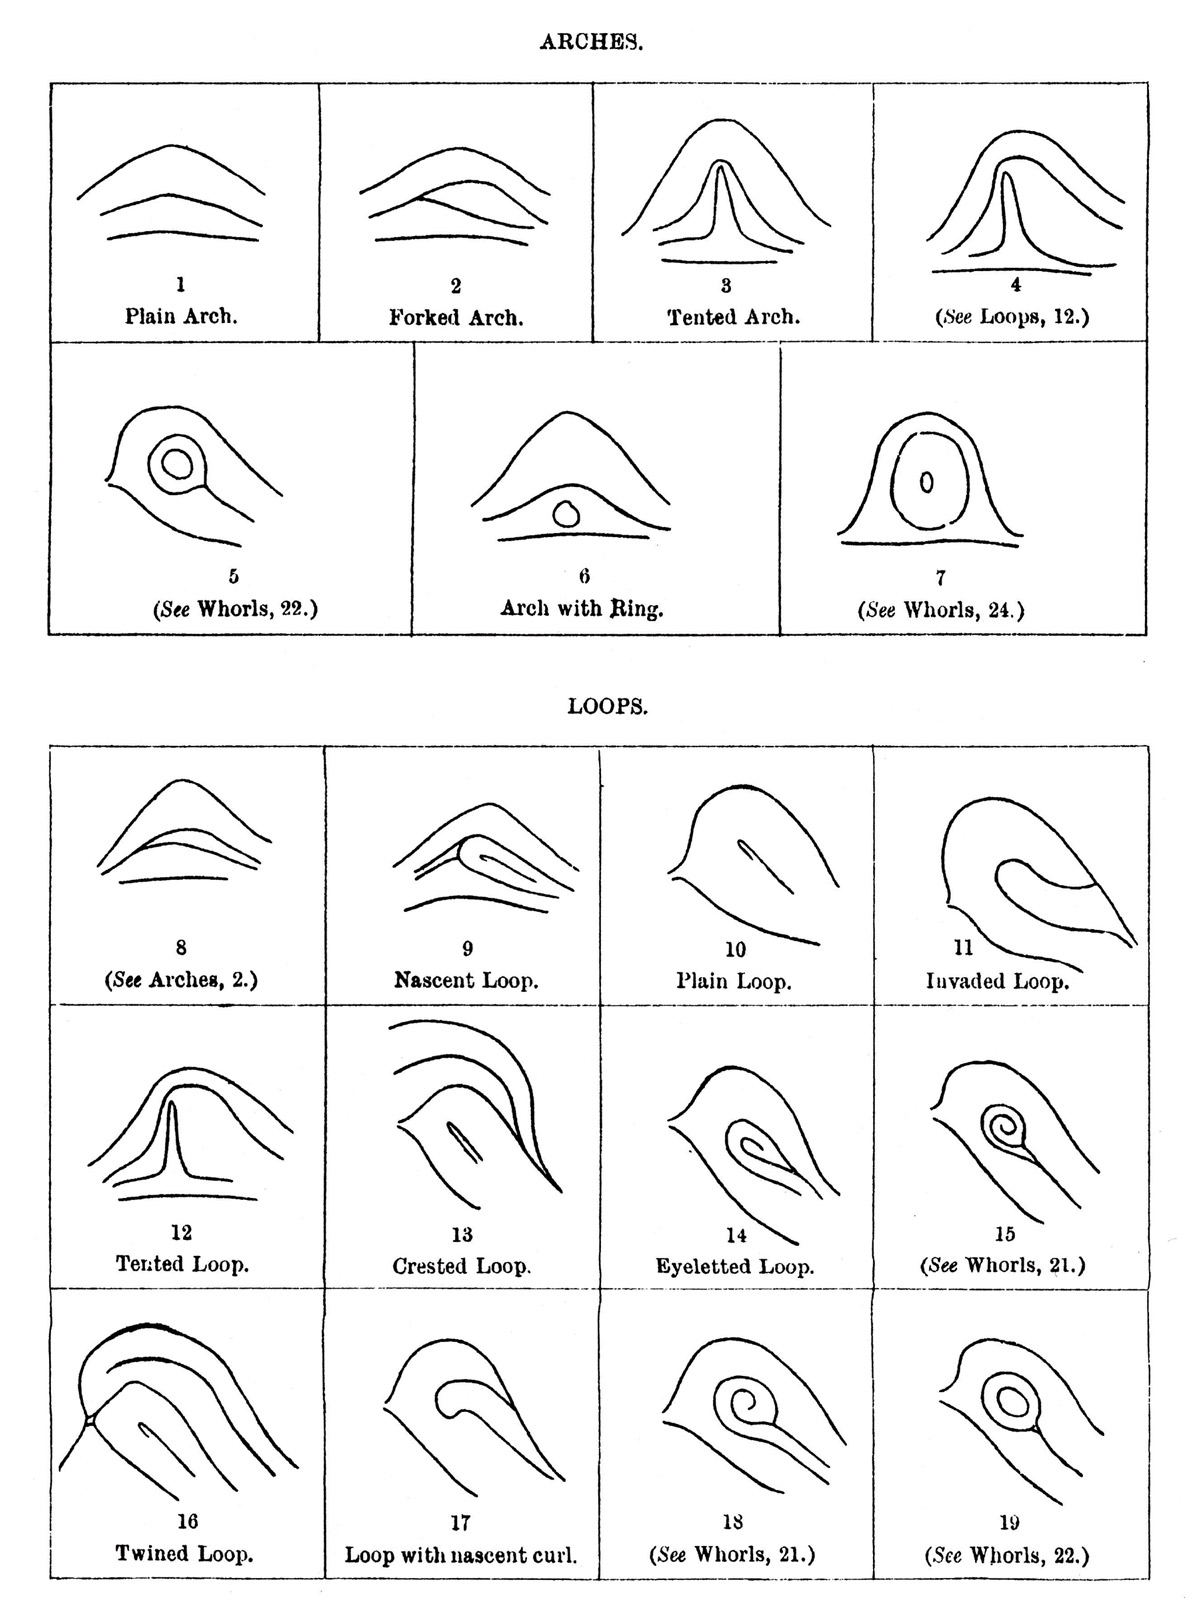 A chart from Francis Galton’s eighteen ninety two “Finger Prints,” depicting examples of different types of so-called arches and loops in fingerprints used for his new identificatory technique.